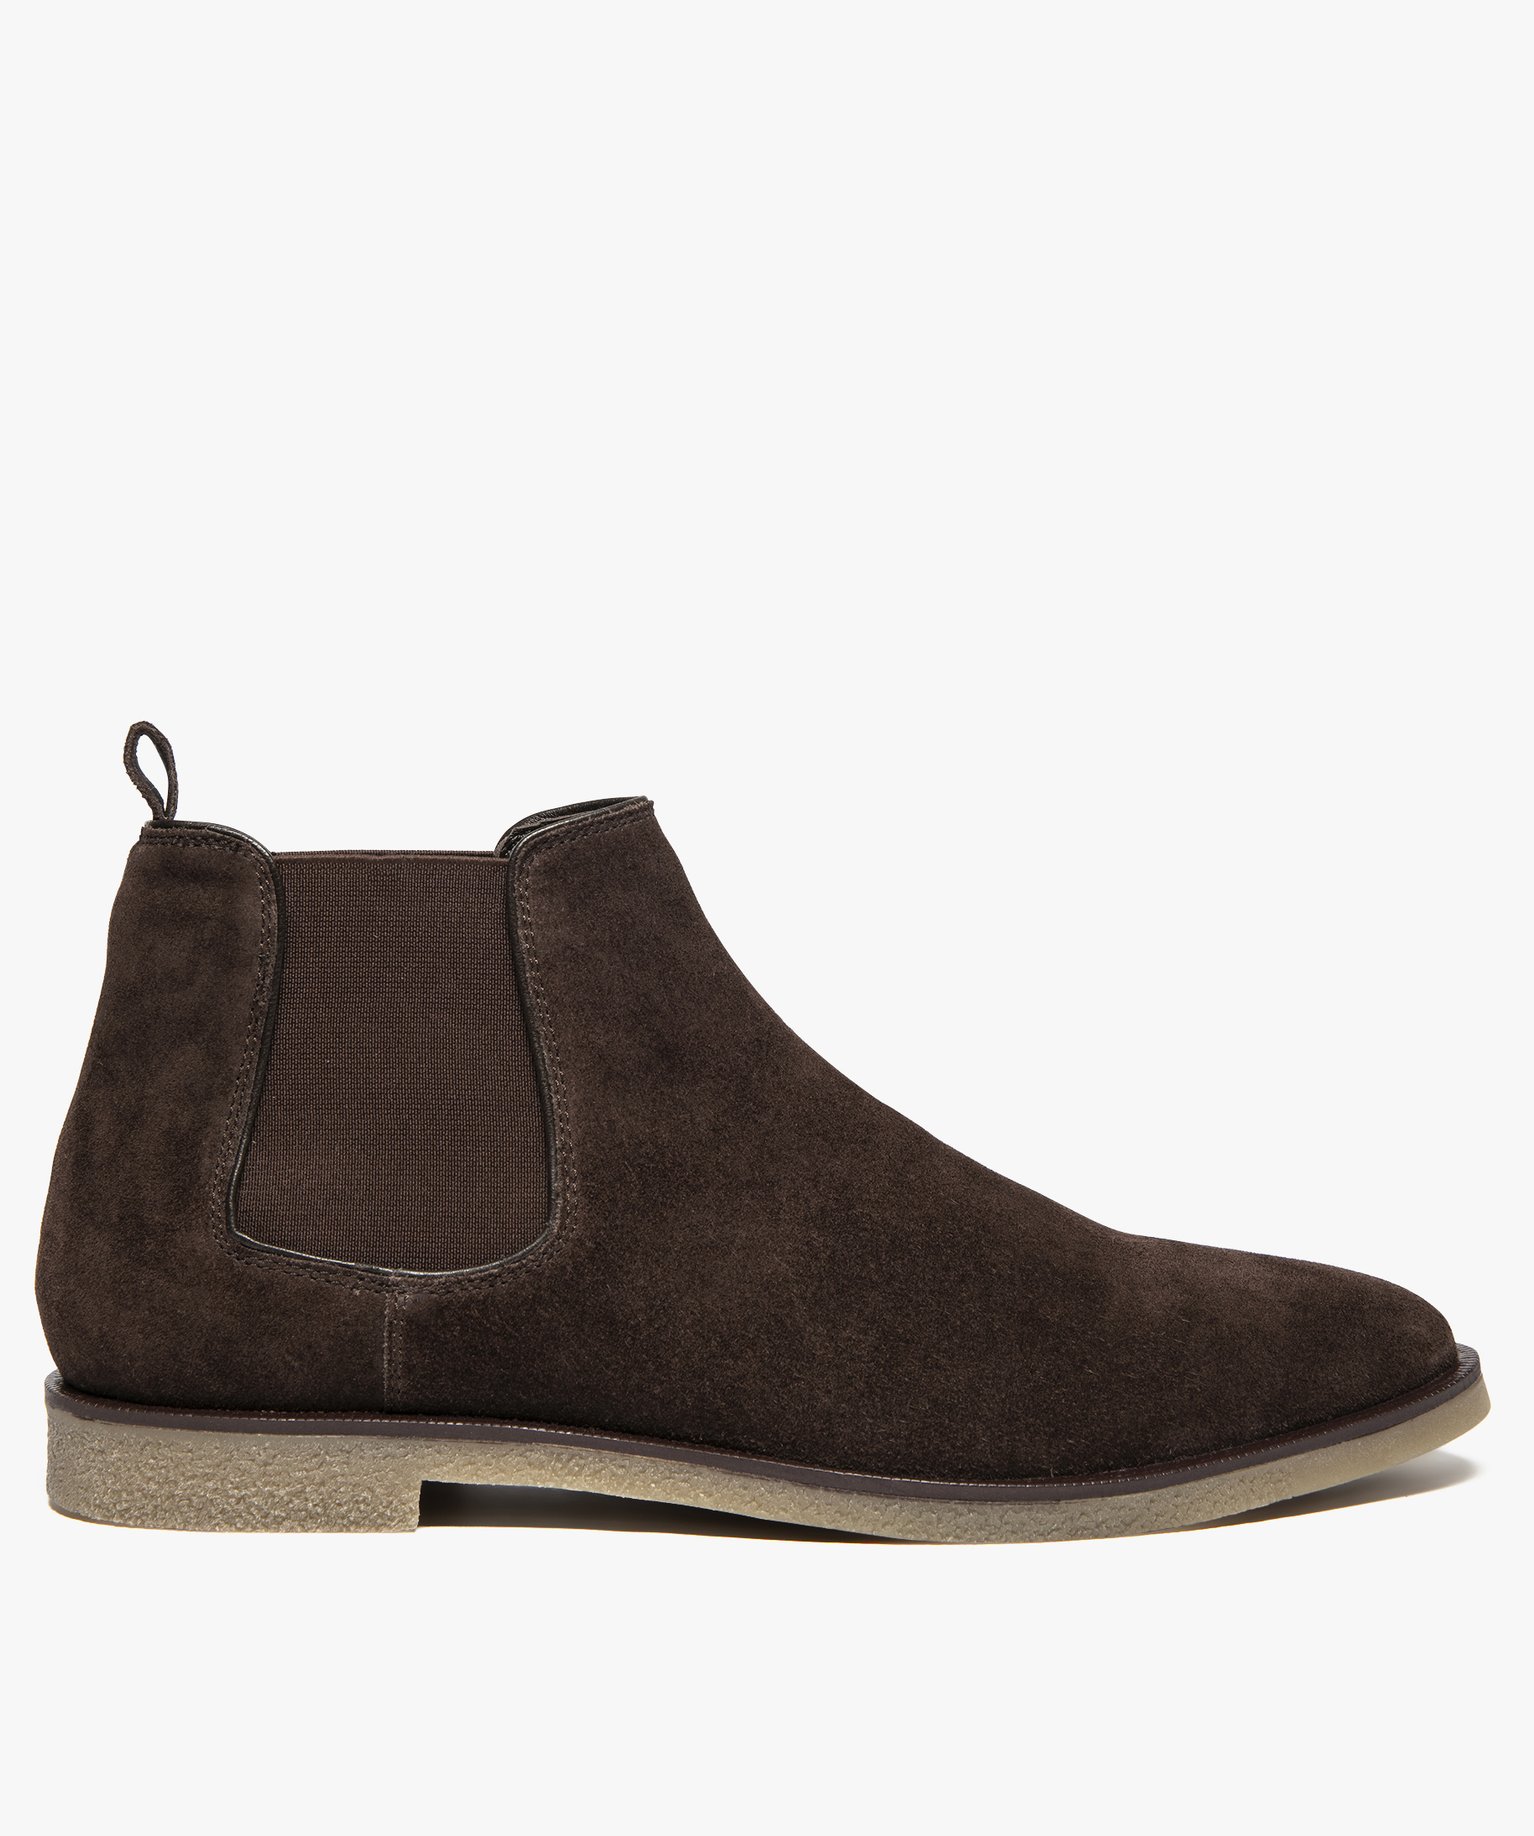 Bottines Chelsea Chaussures Homme Chaussures Bottes Bottines 